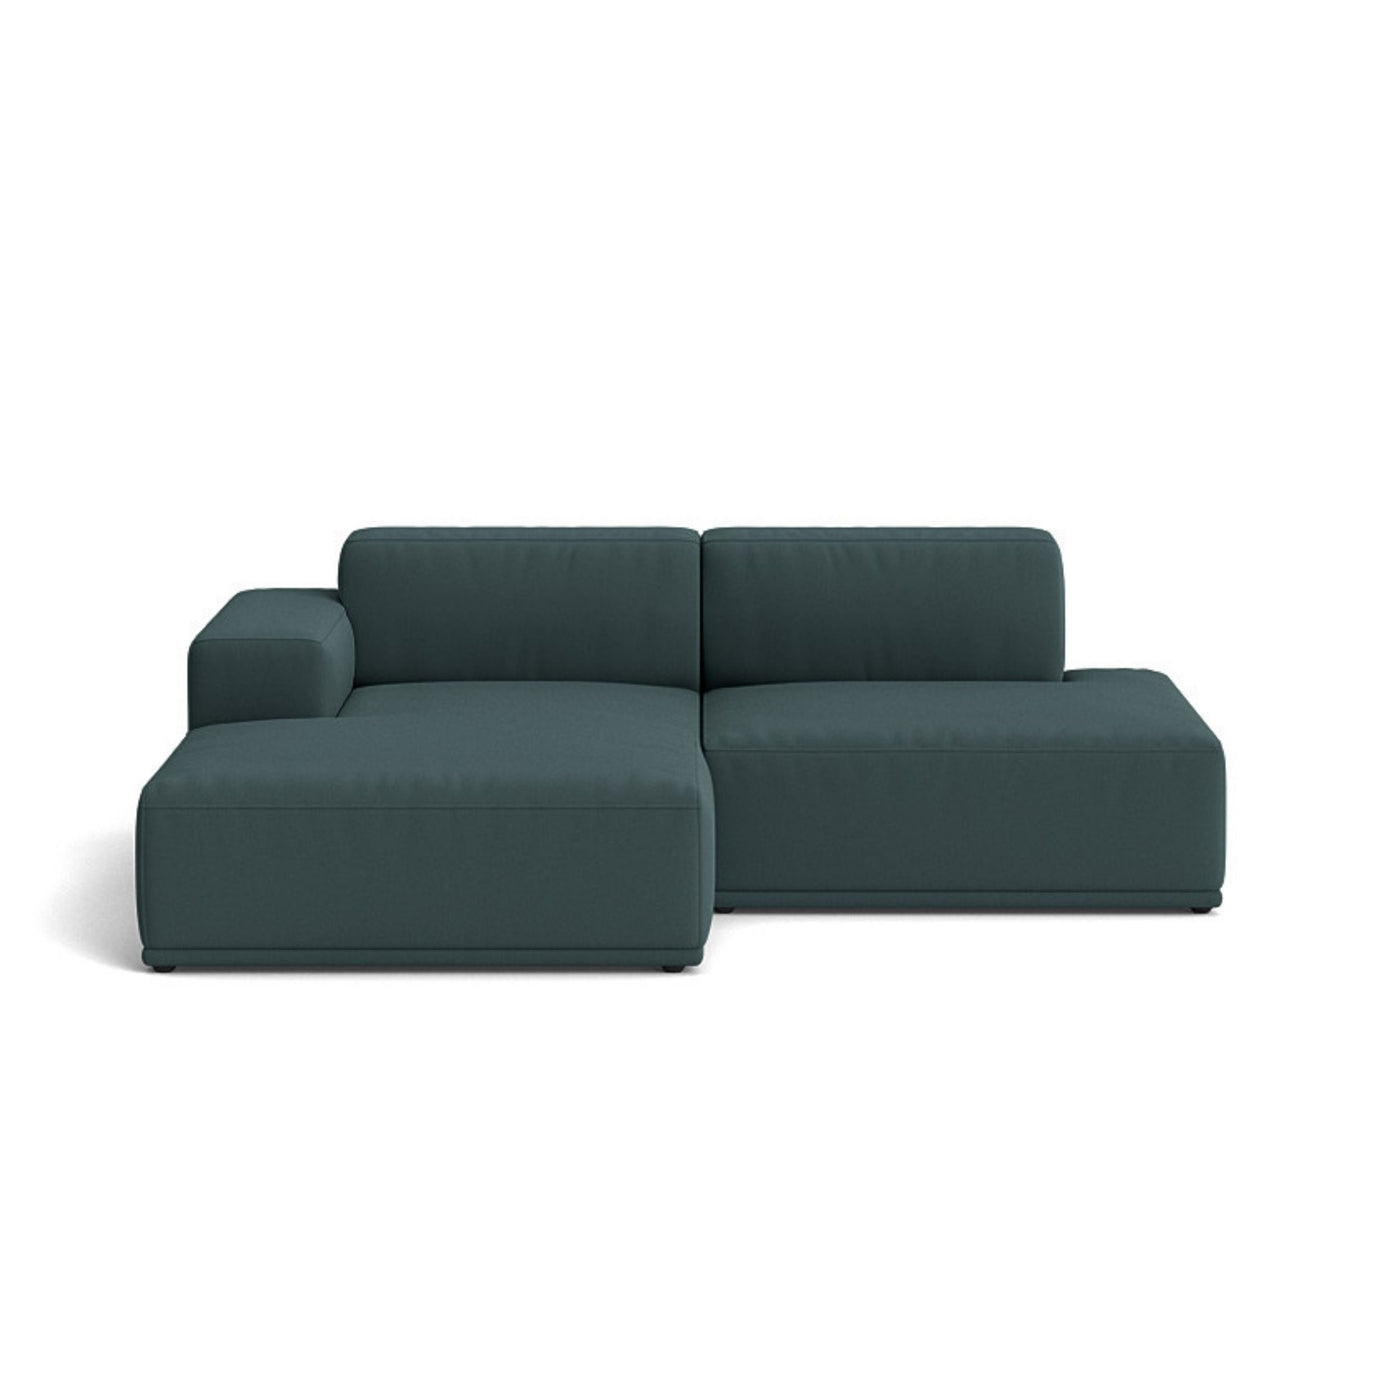 Muuto Connect Soft Modular 2 Seater Sofa, configuration 3. made-to-order from someday designs. #colour_steelcut-180